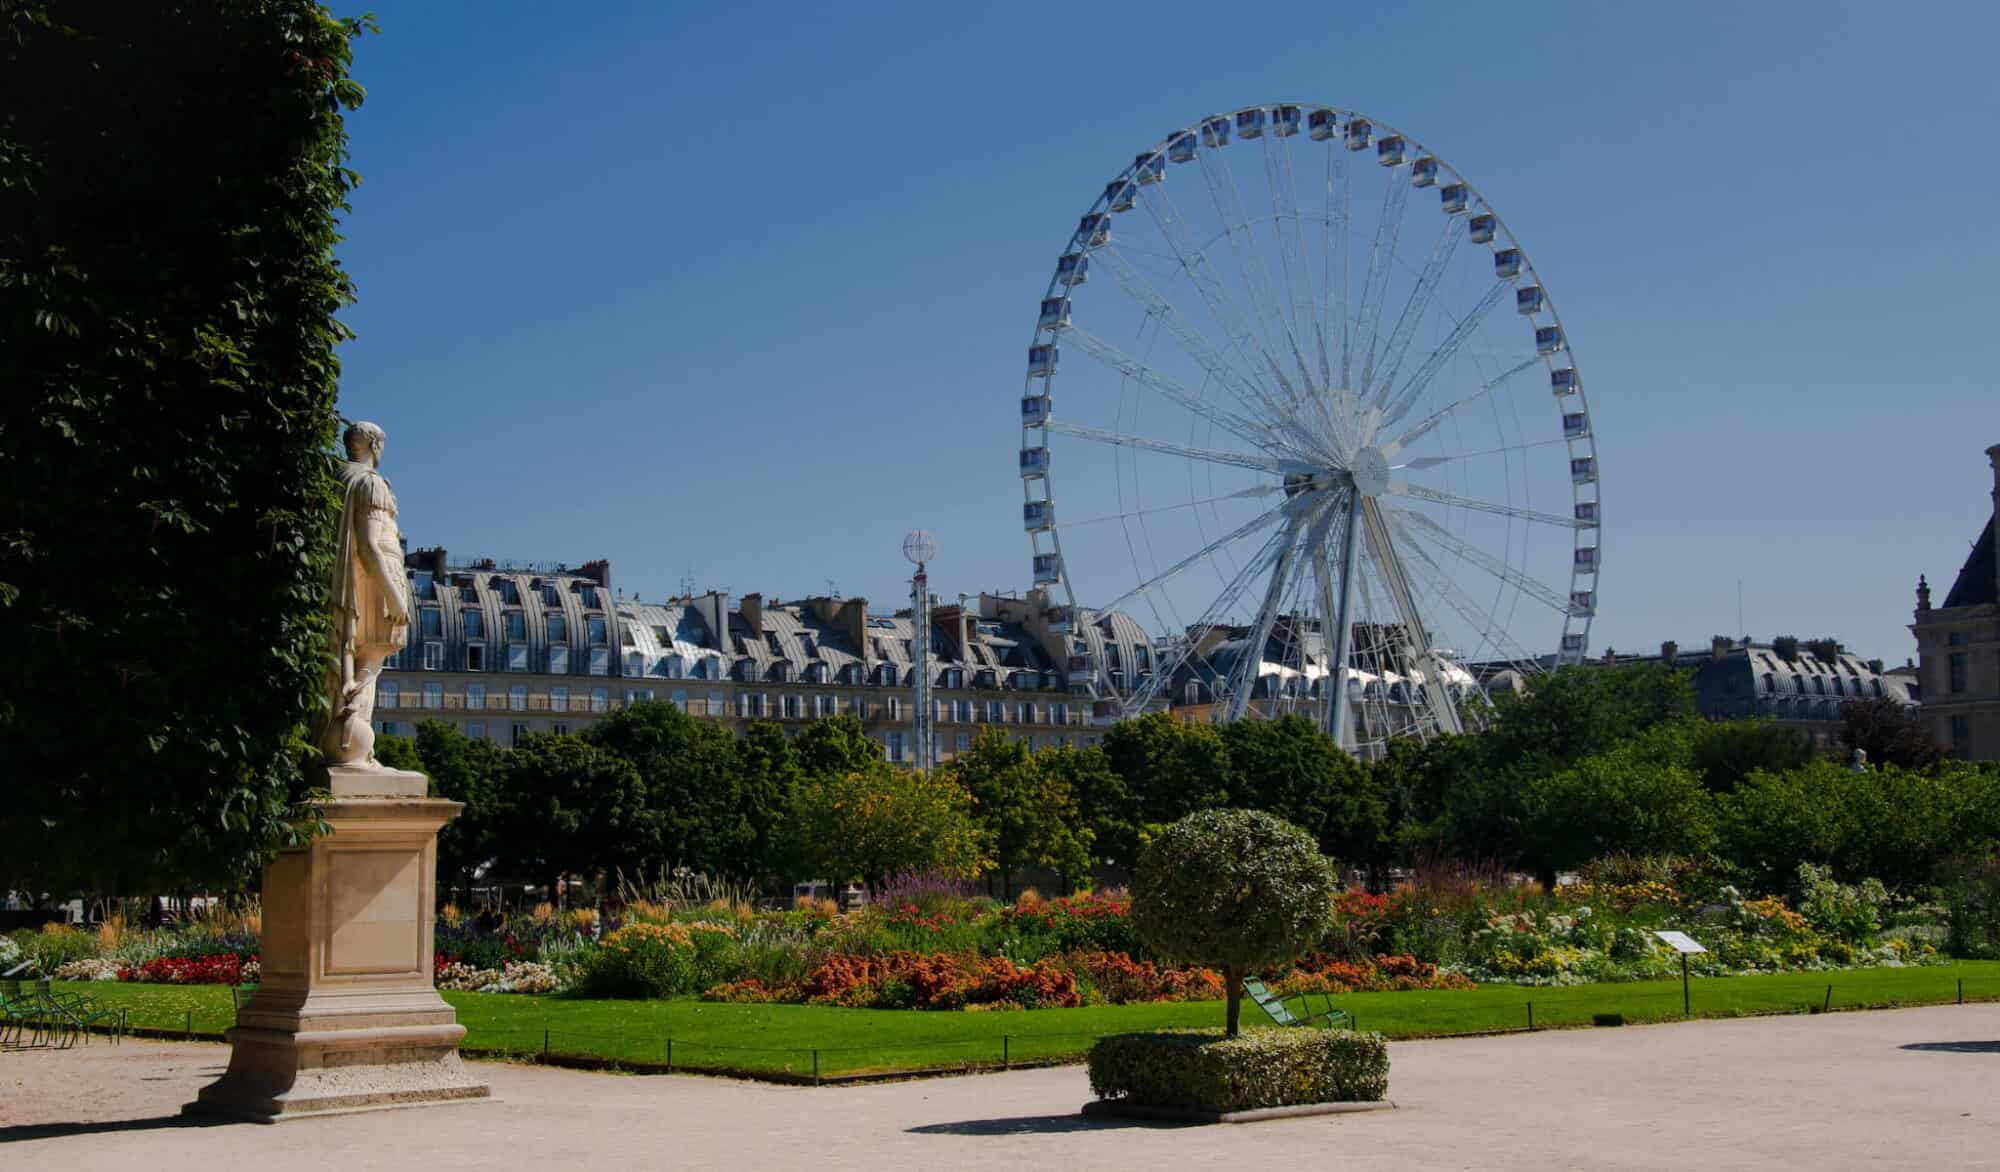 A huge ferris wheel in the middle of a park in Paris.